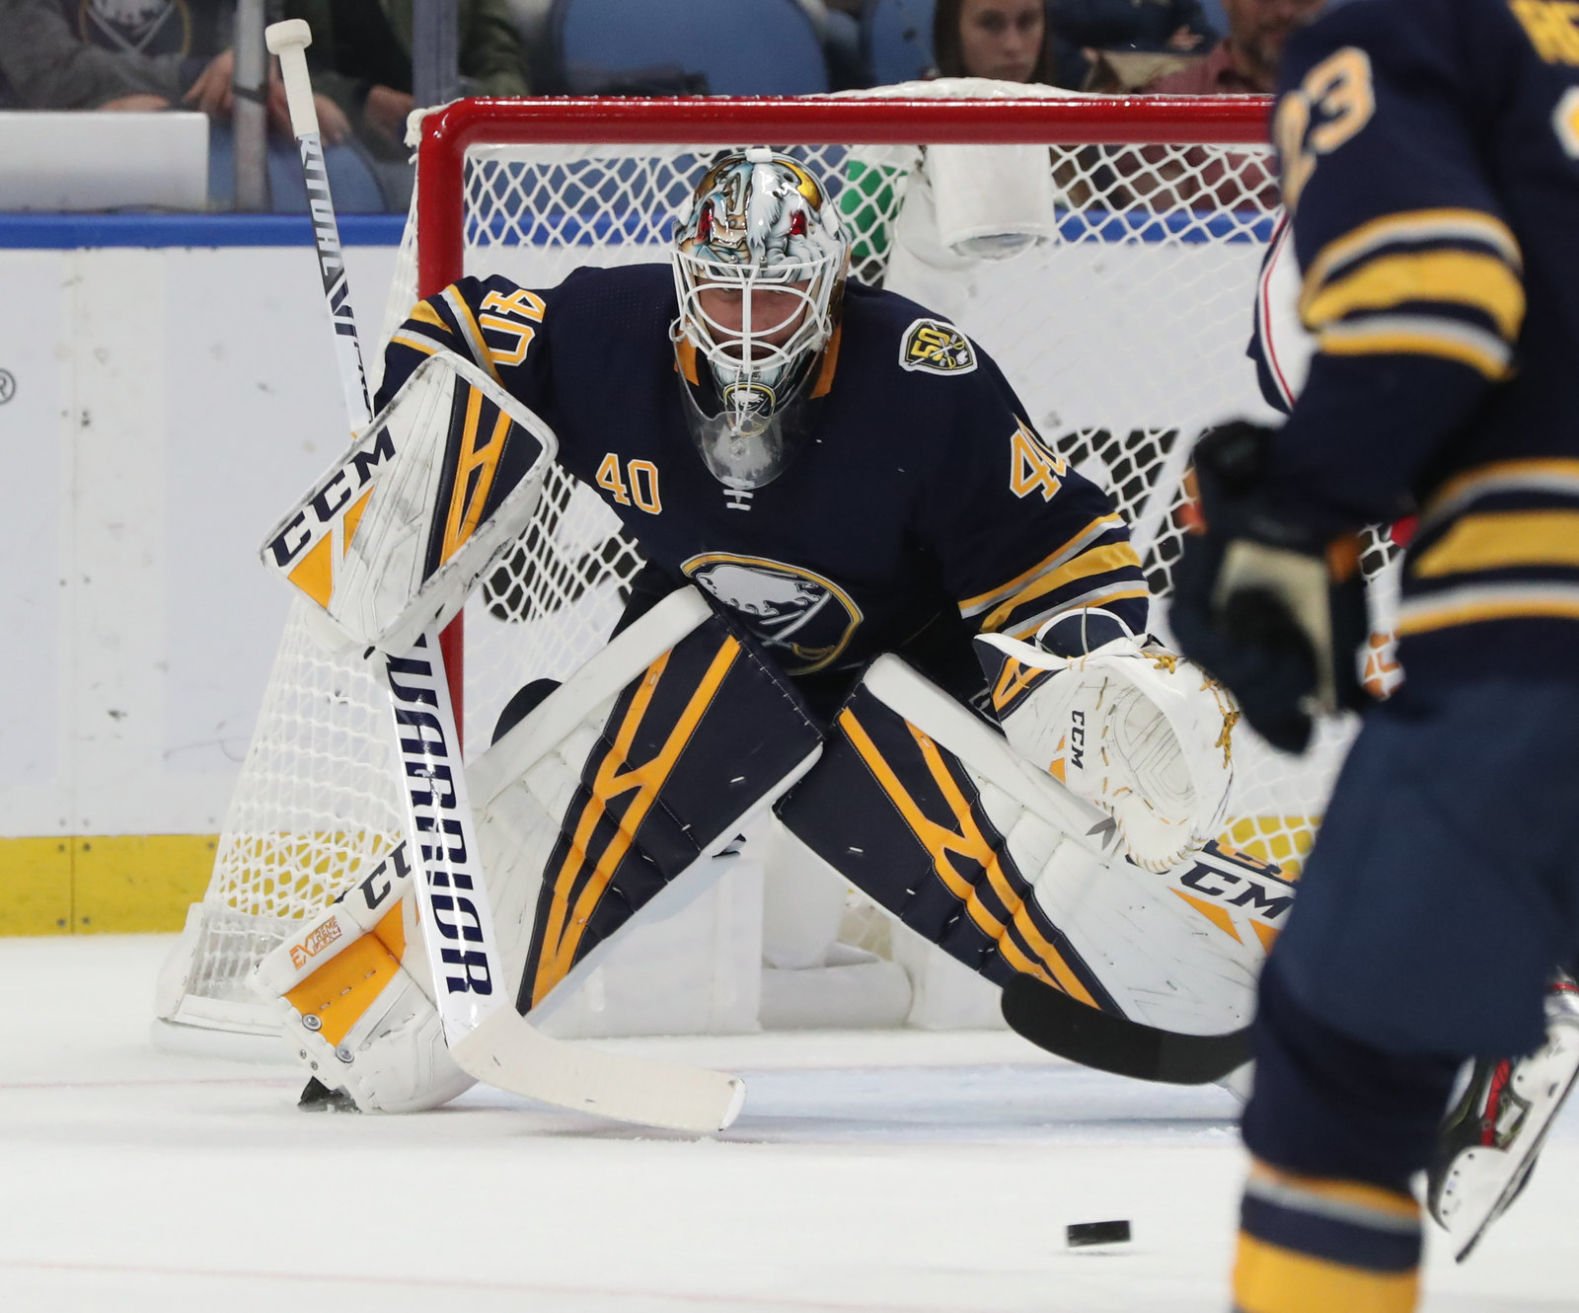 carter hutton save of the year